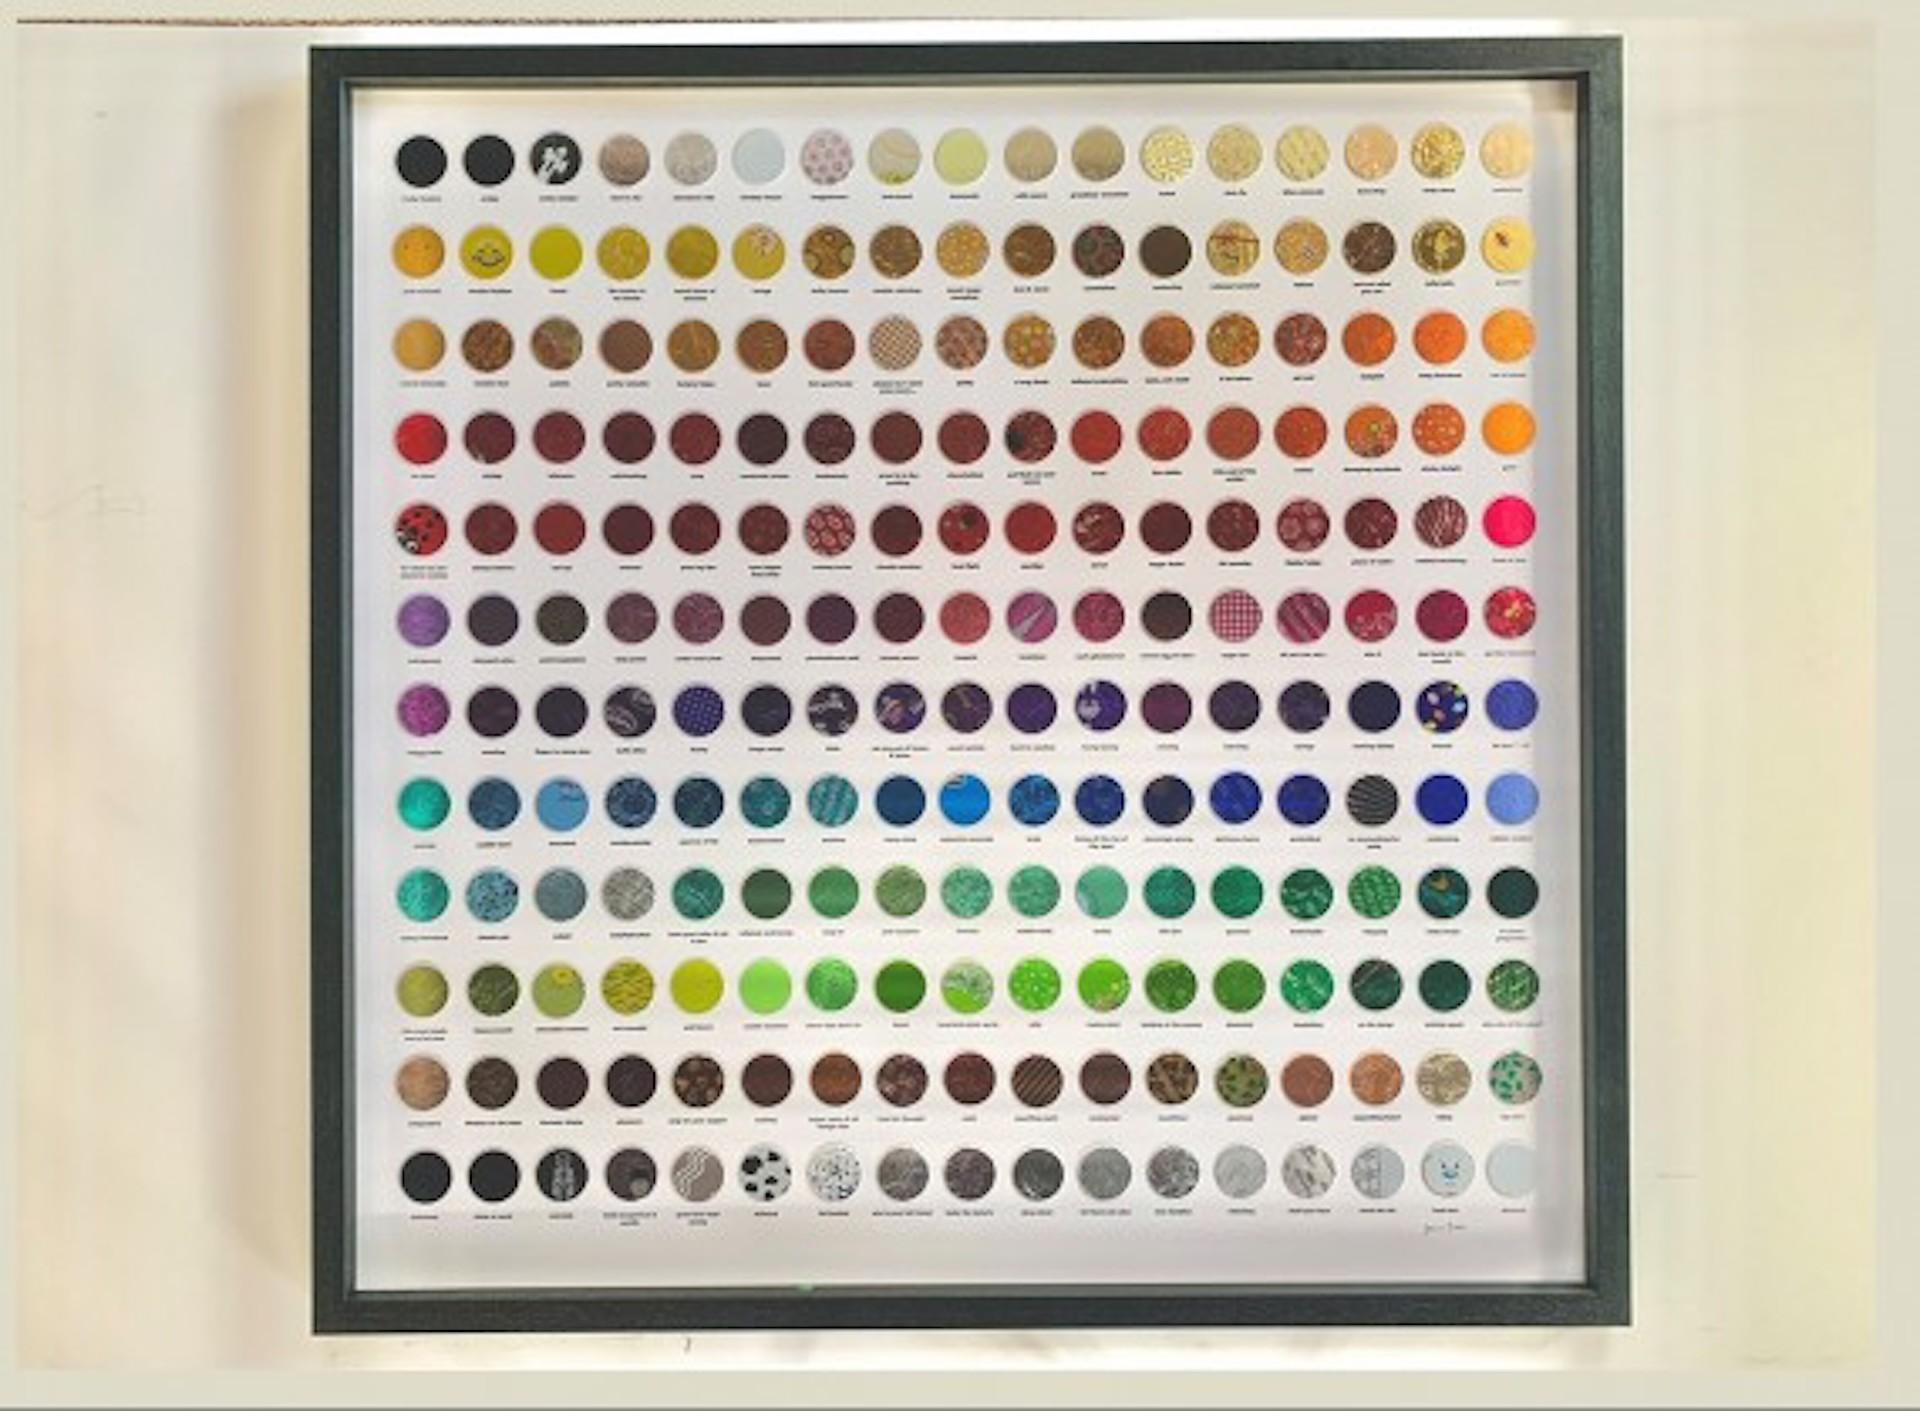 Ultimate Chocolate Lovers Colour Chart [2021]
Original
Still Life
Foil Mounted on Frame
Image size: H:97 cm x W:99 cm
Frame Size: H:102 cm x W:104 cm x D:4cm
Sold Framed
Please note that insitu images are purely an indication of how a piece may